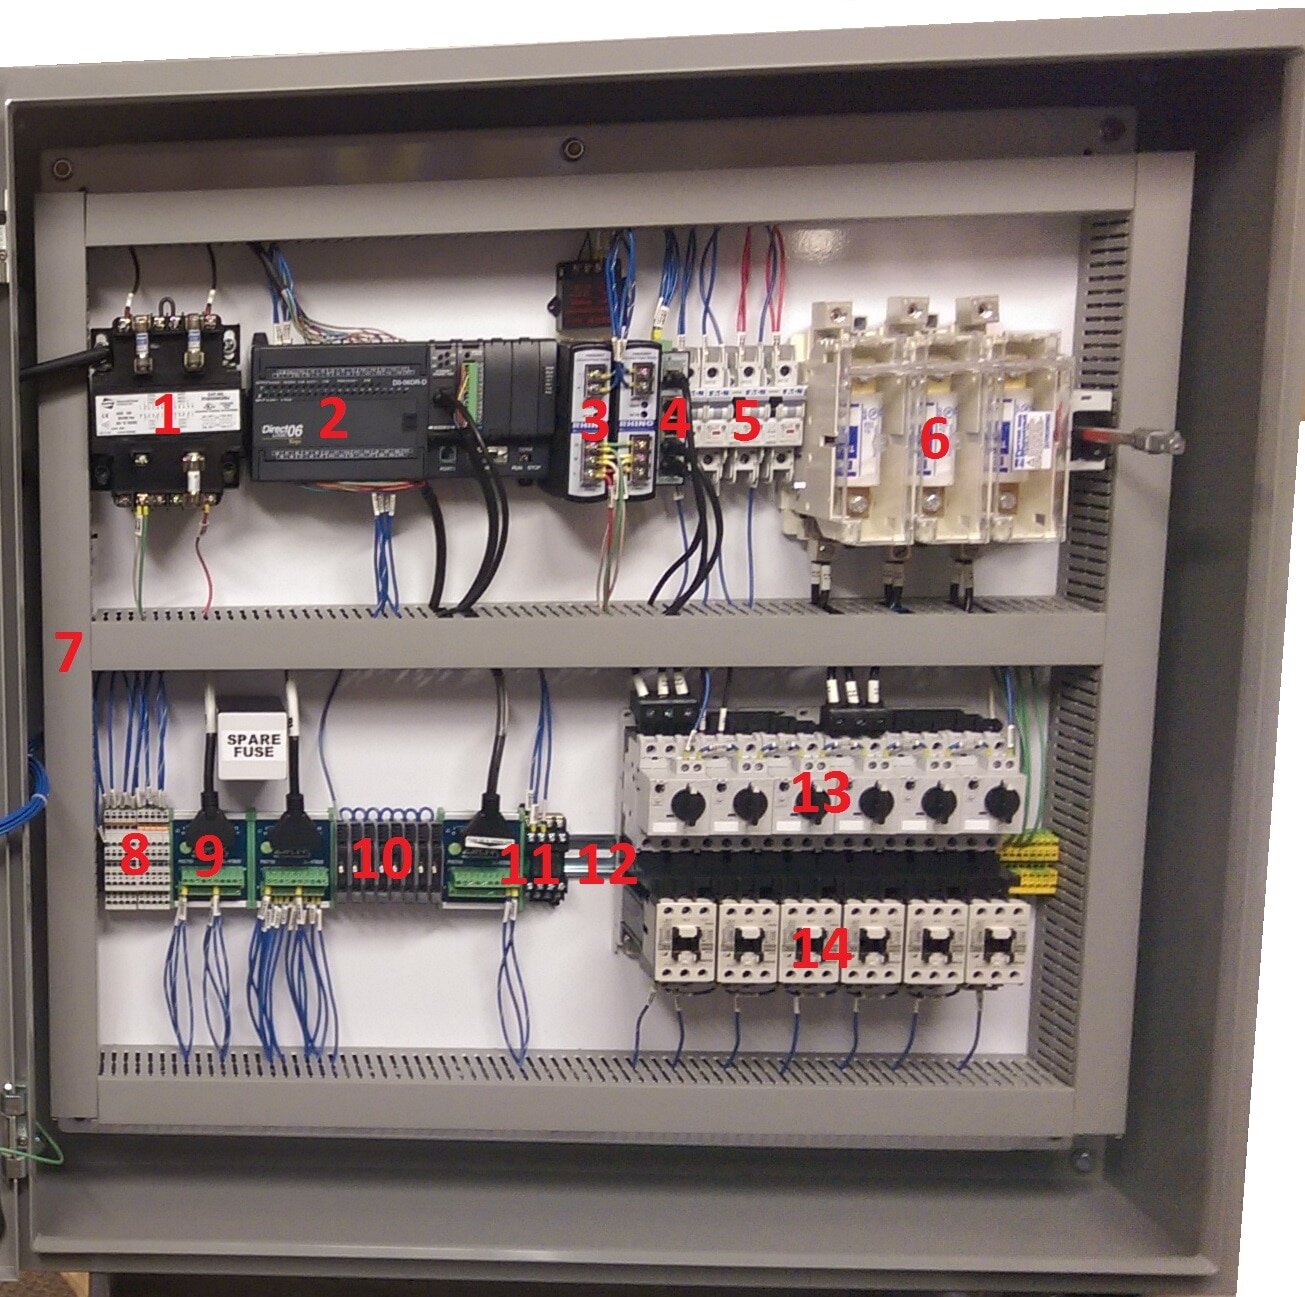 Identifying Industrial Control Panel, How To Learn Control Panel Wiring